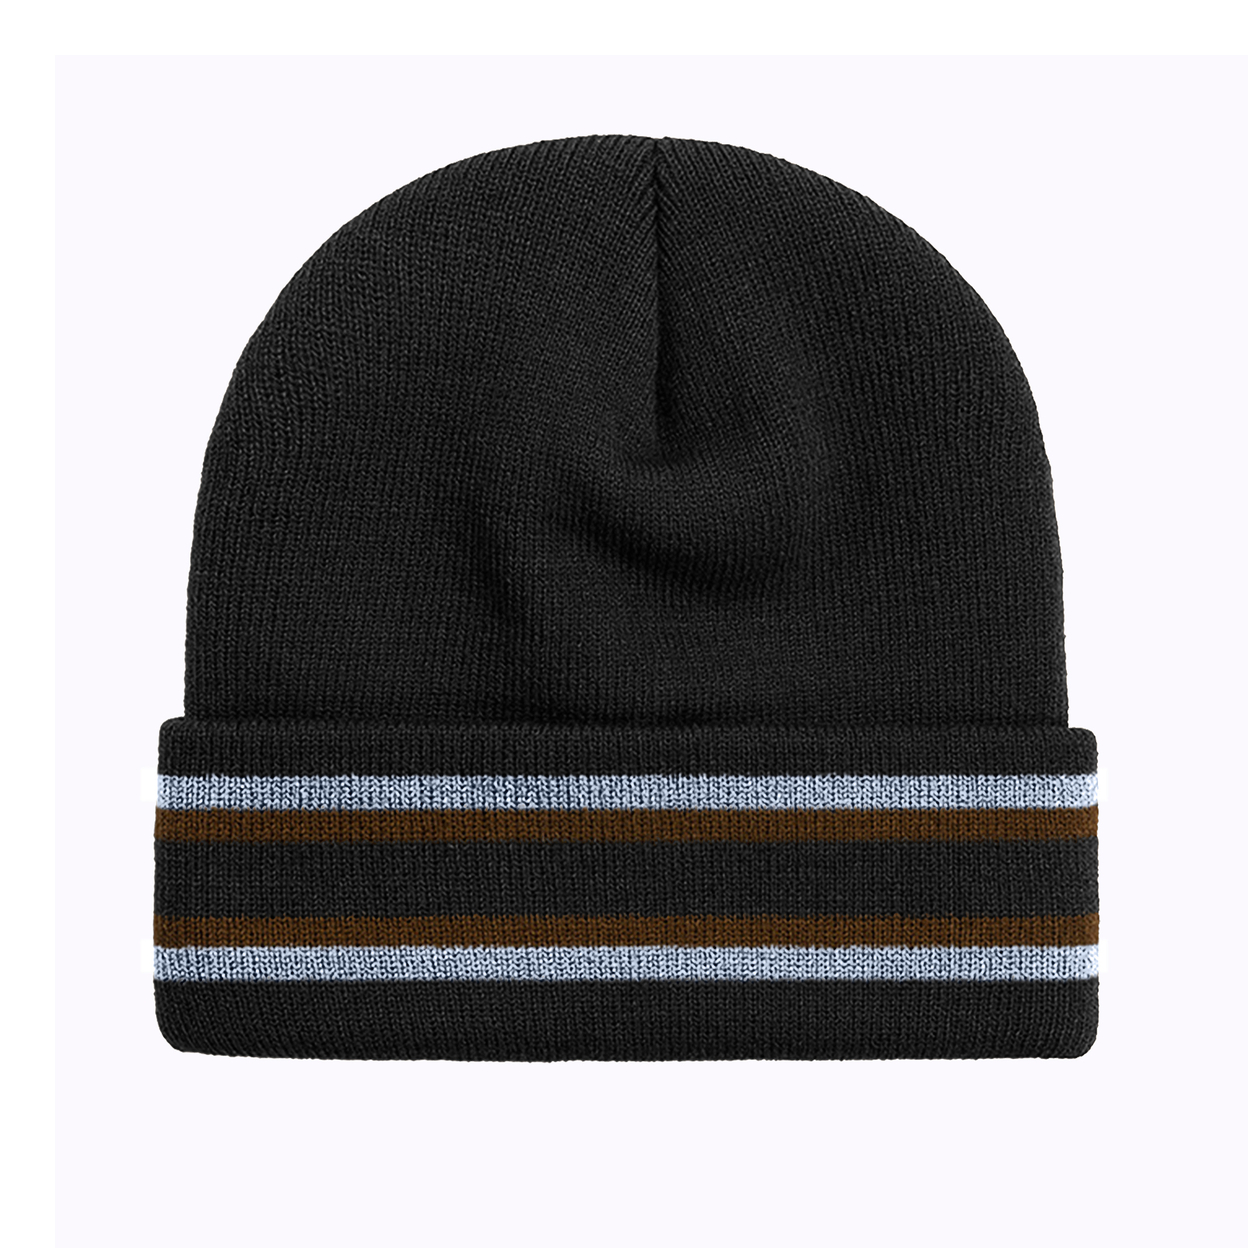 3-Pack Men's Winter Warm Cozy Knit Cuffed Solid & Striped Beanie Hat With Faux Fur Lining - Striped